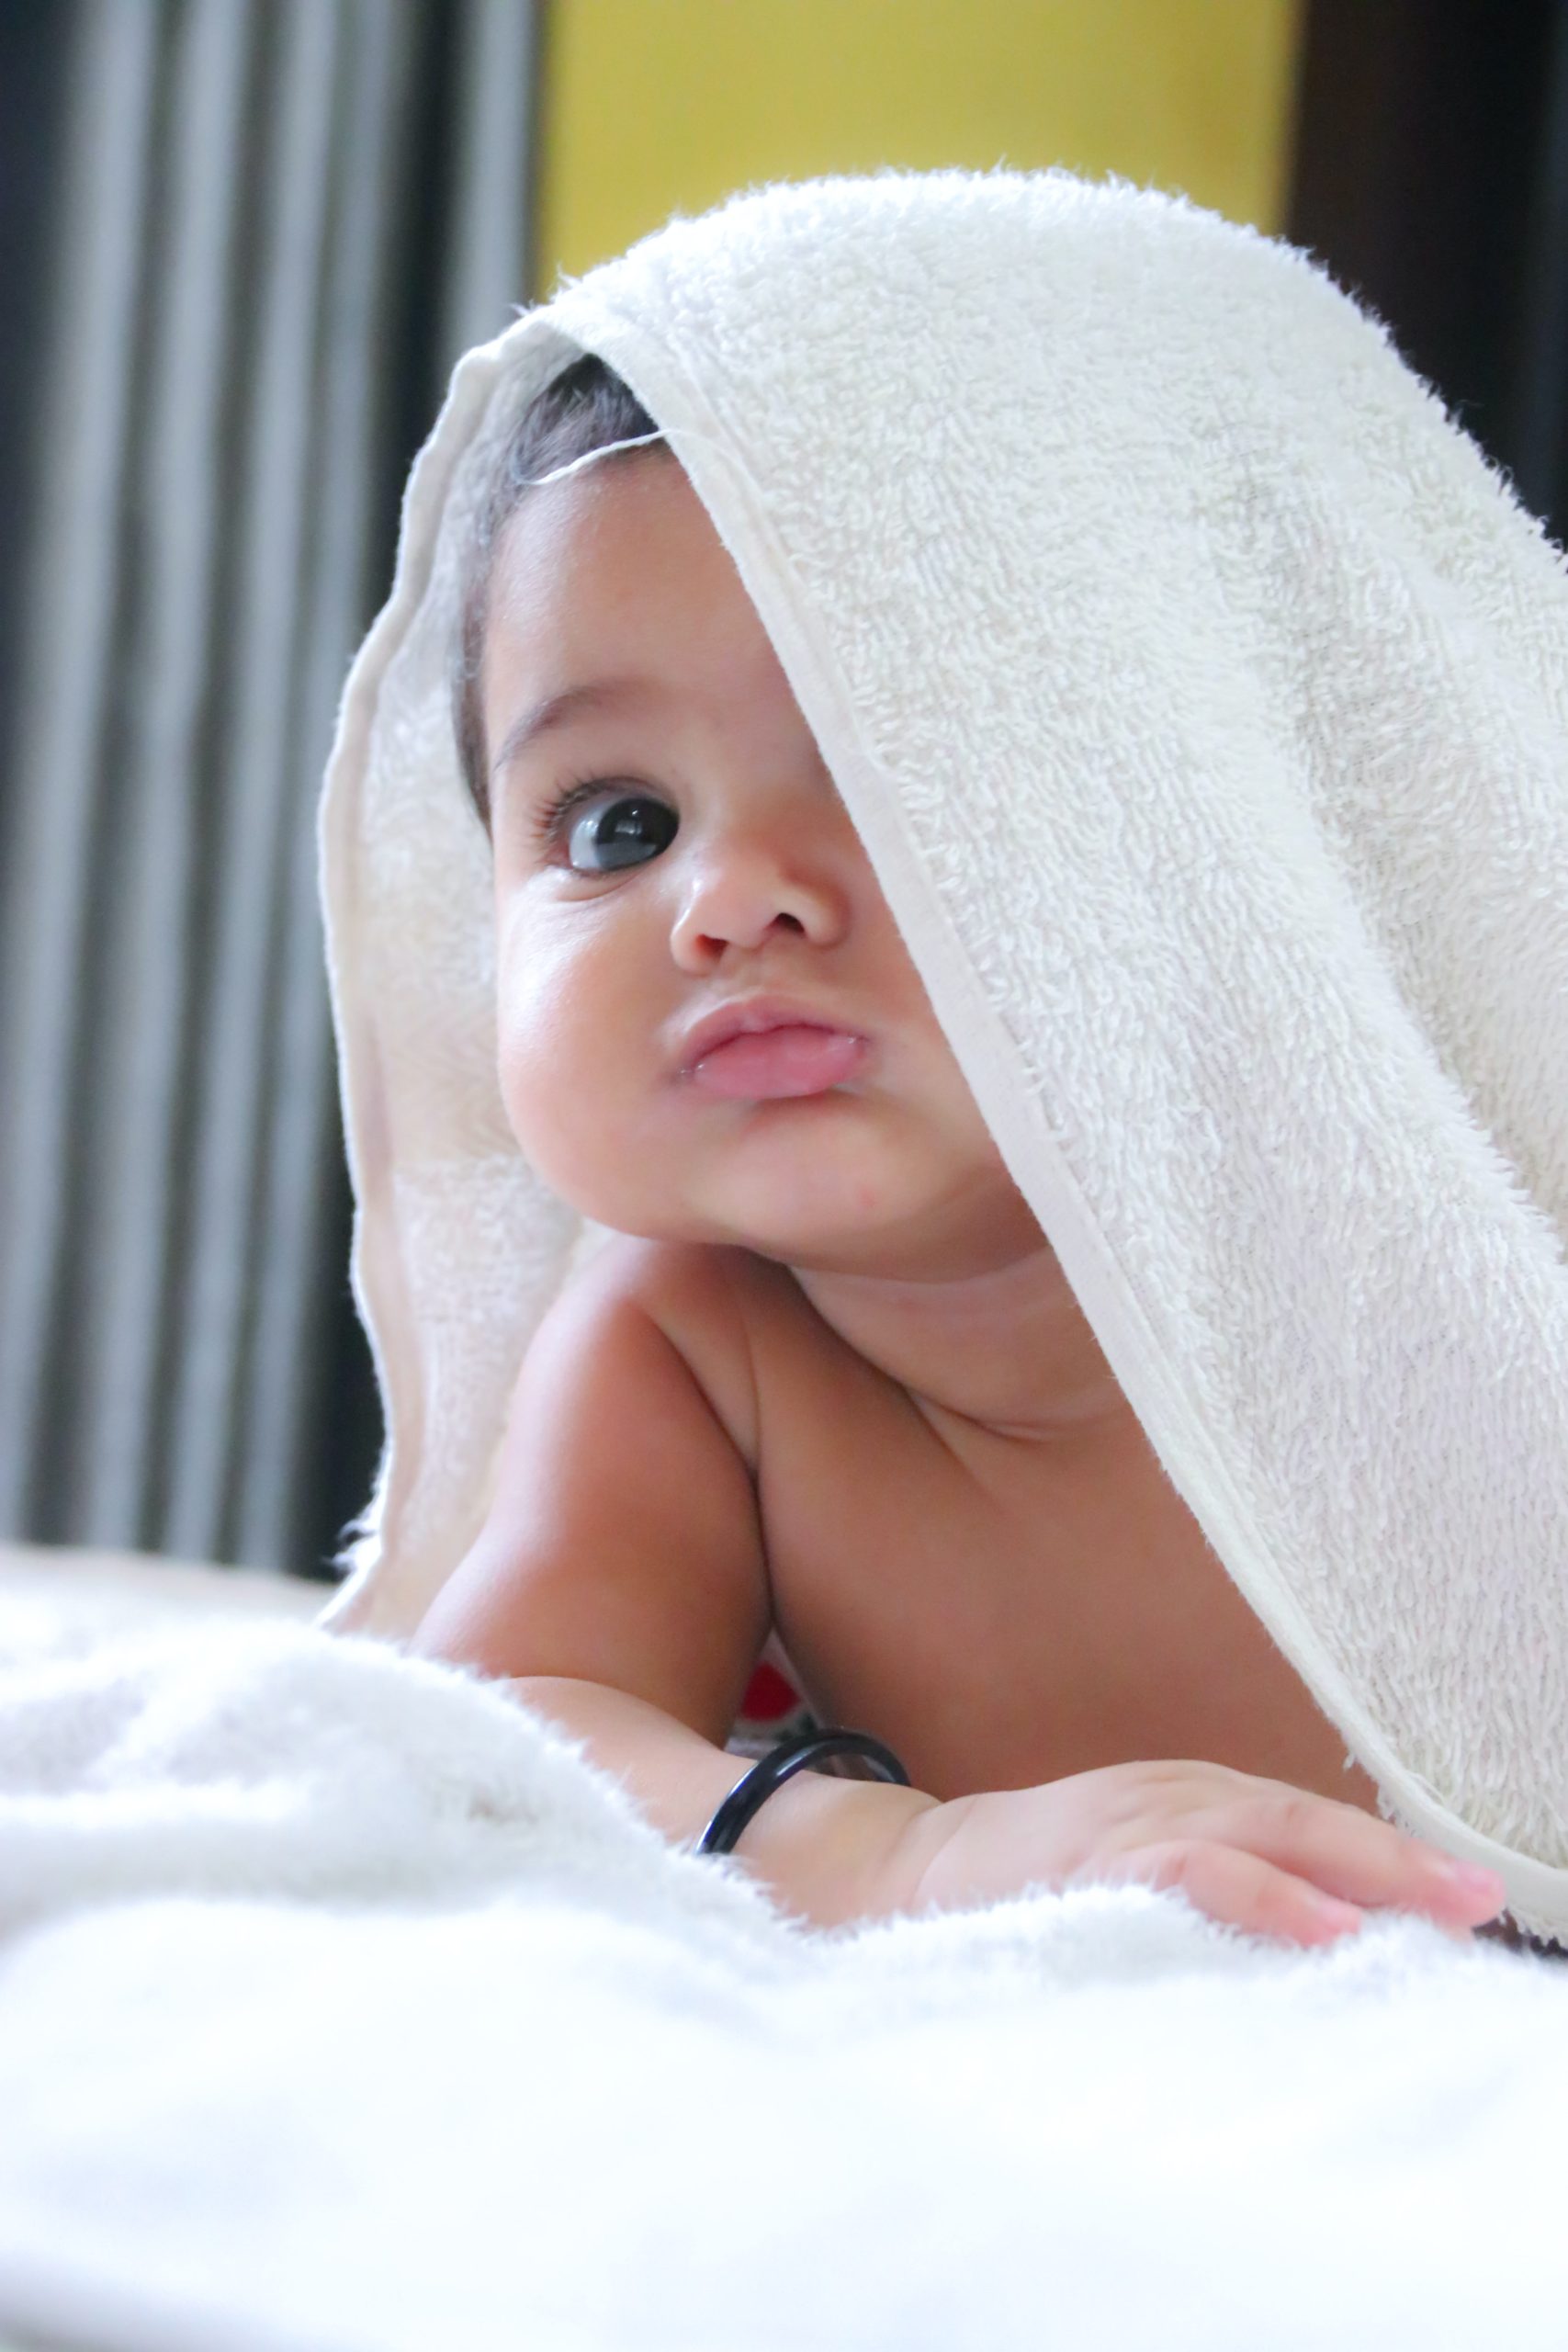 baby peeping from under white towel